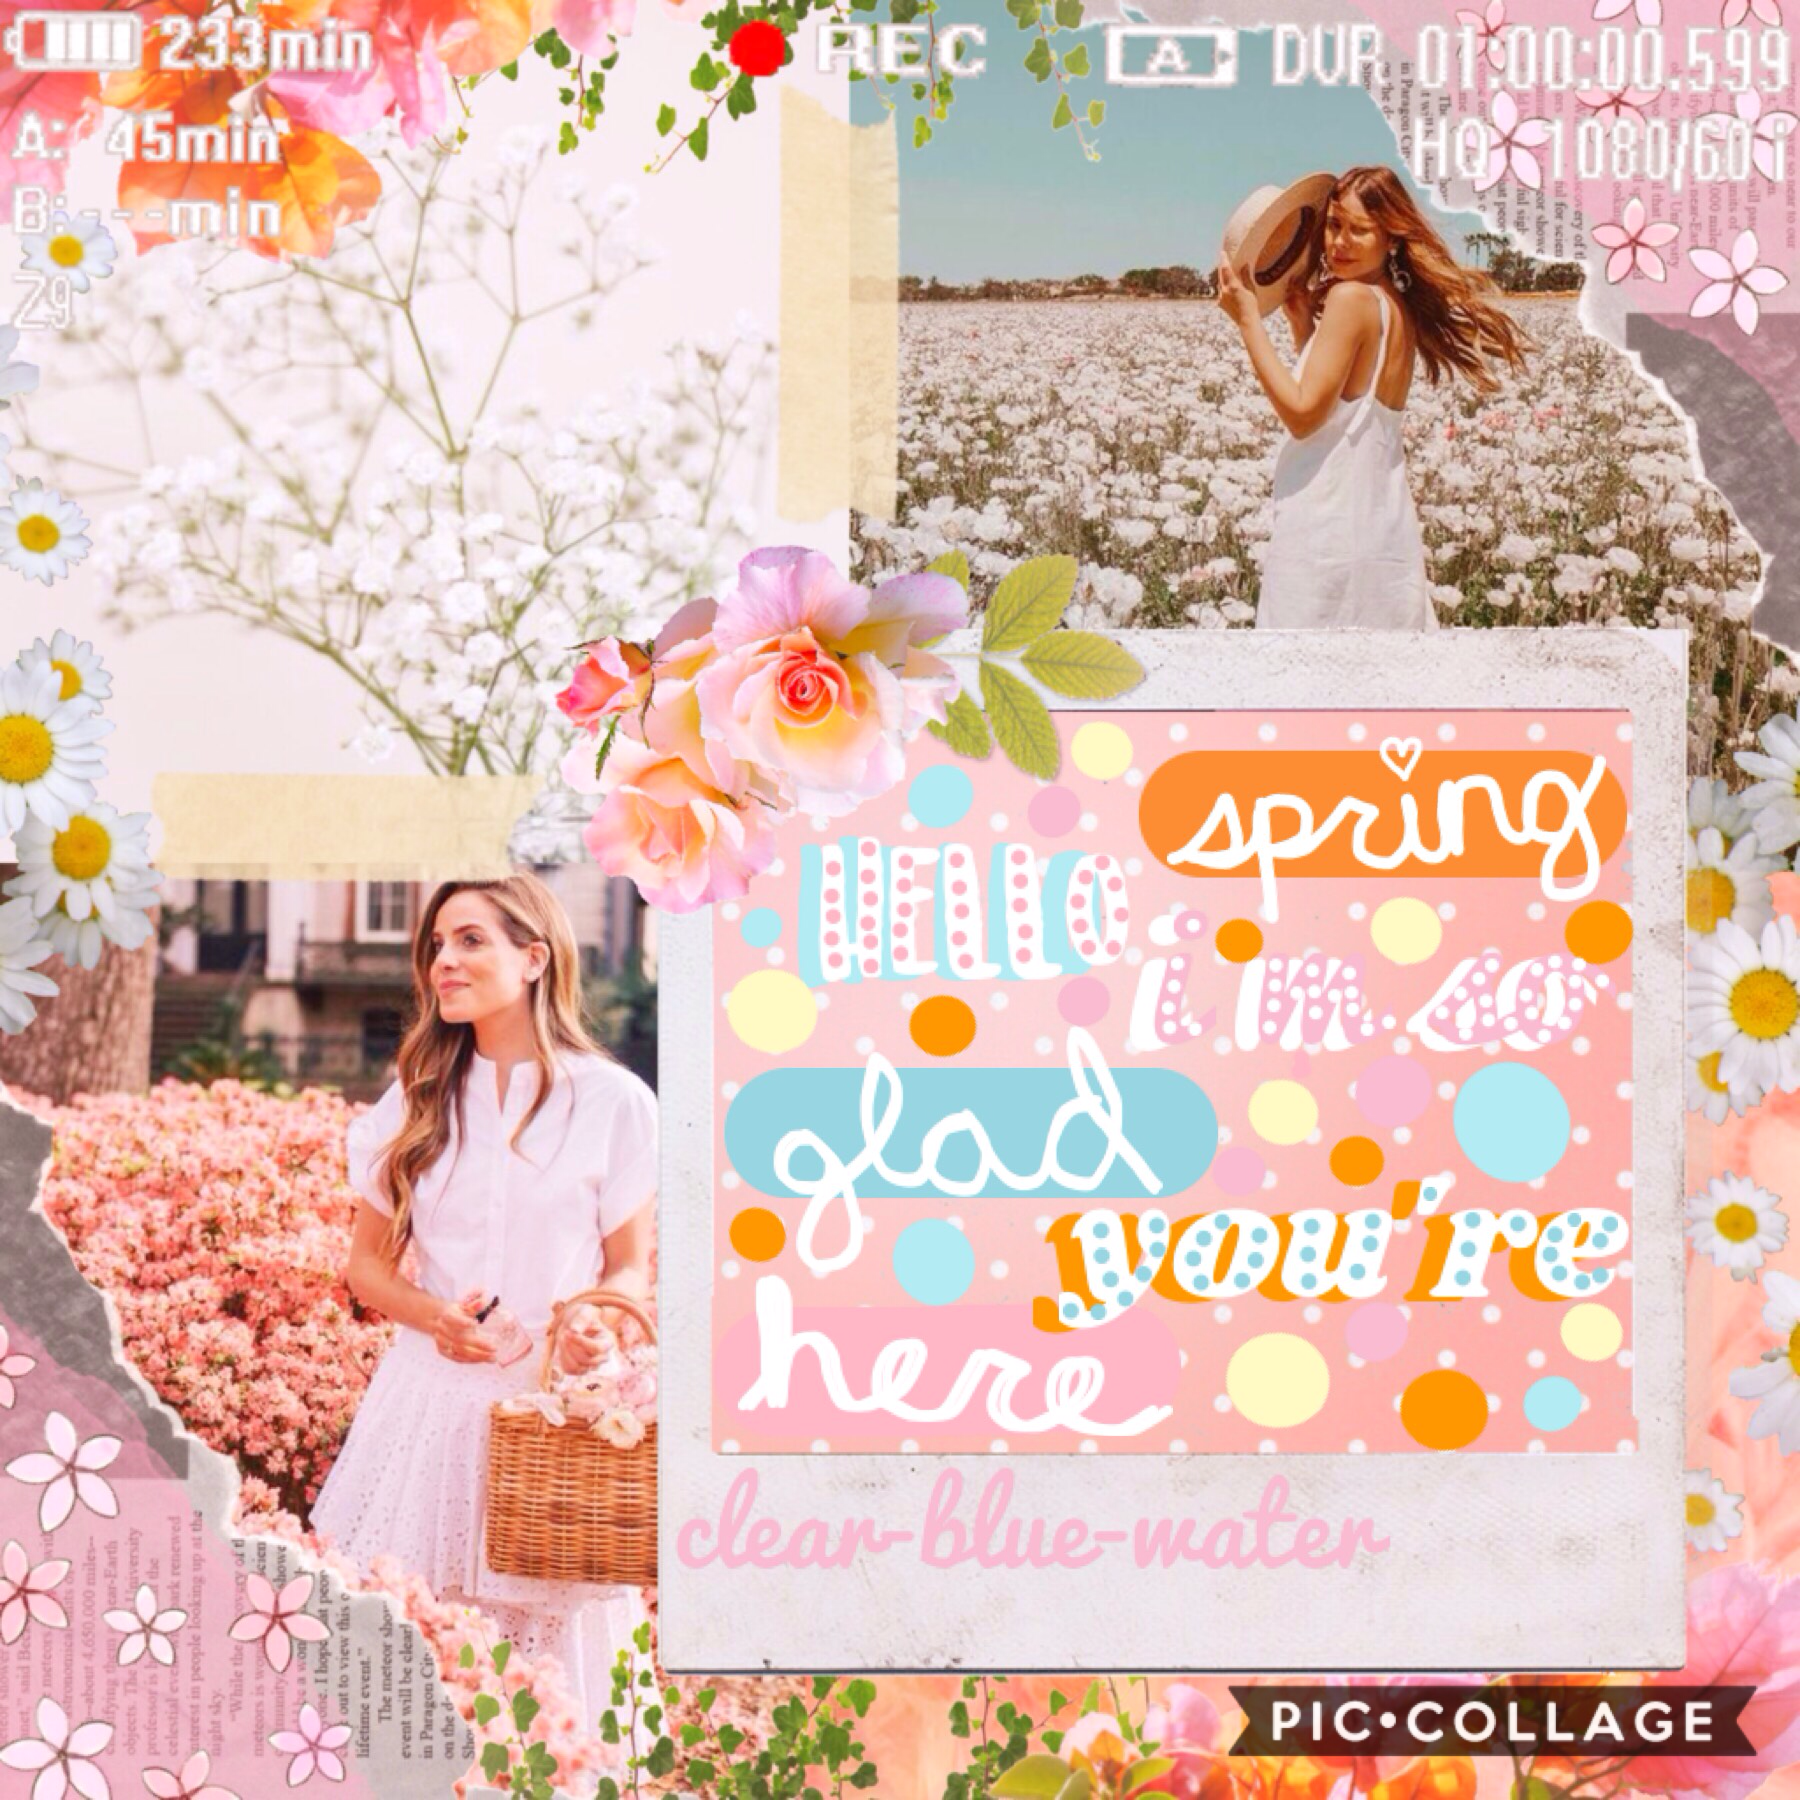 🌸T A P🌸
Quick little spring edit. Hope you like it. 
QOTD: What is your favorite flower?
AOTD: Orchids or Zinnias 